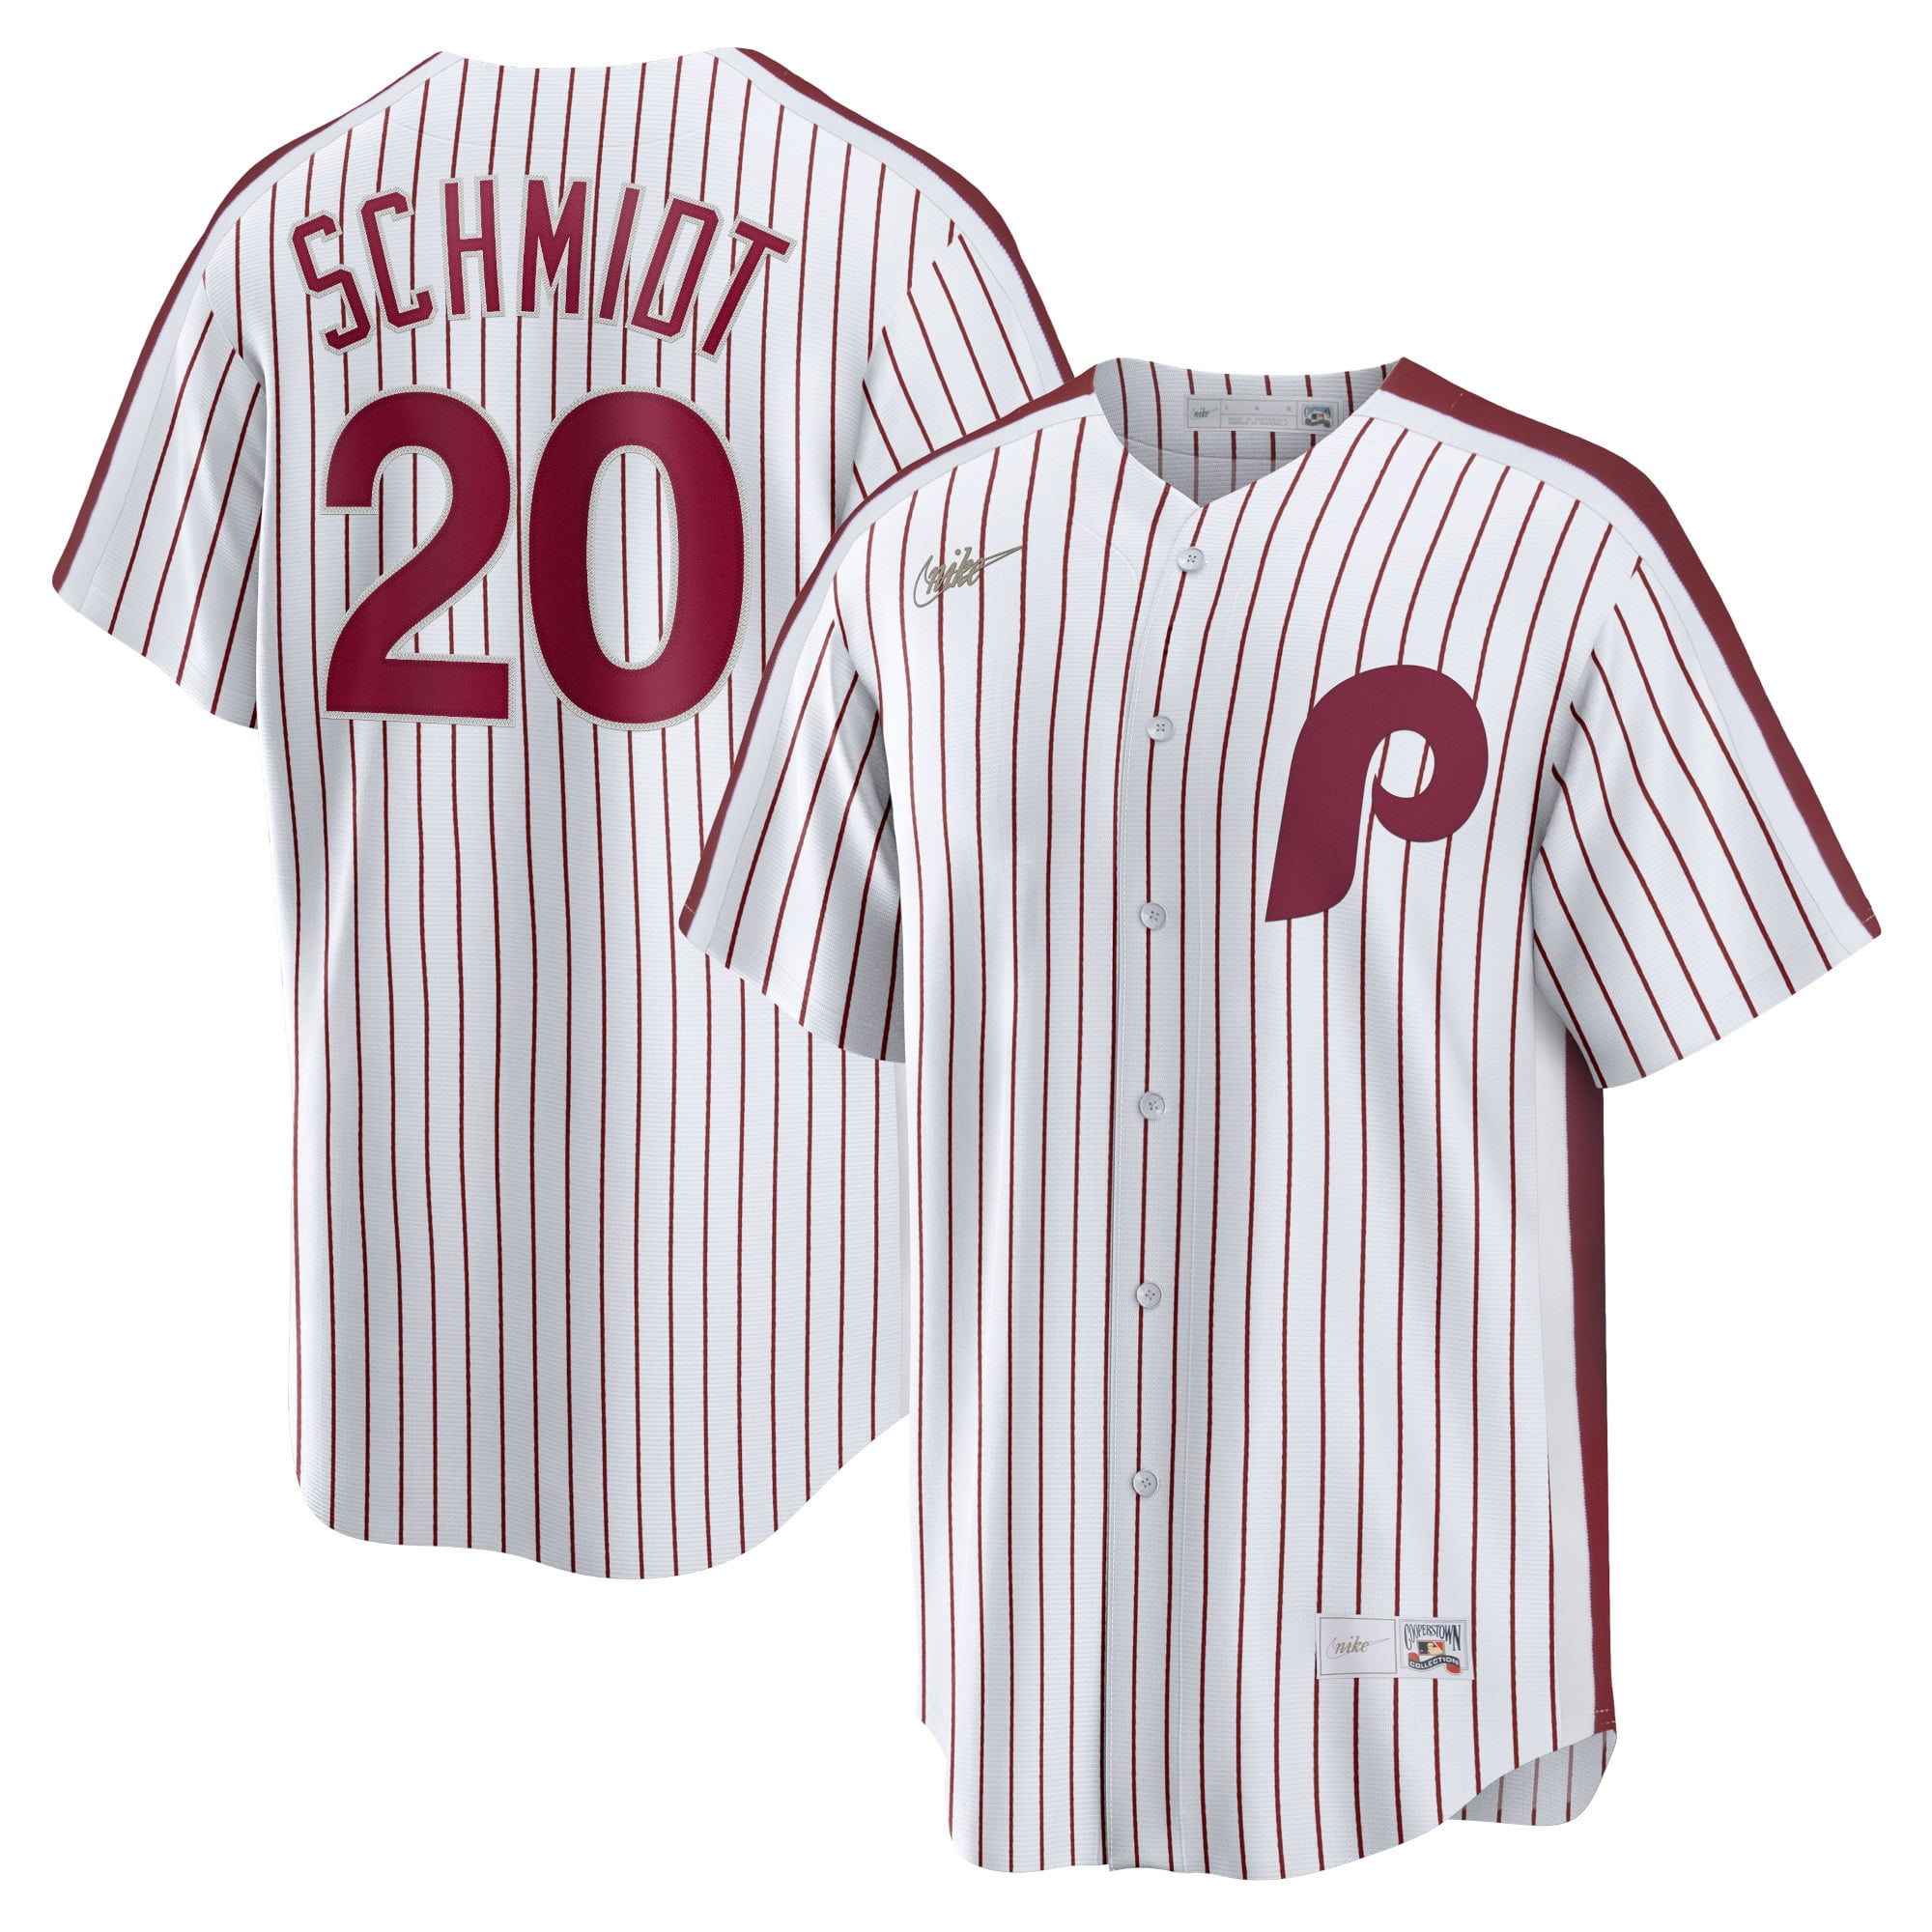 Mitchell & Ness Mike Schmidt vintage style 1980 jersey